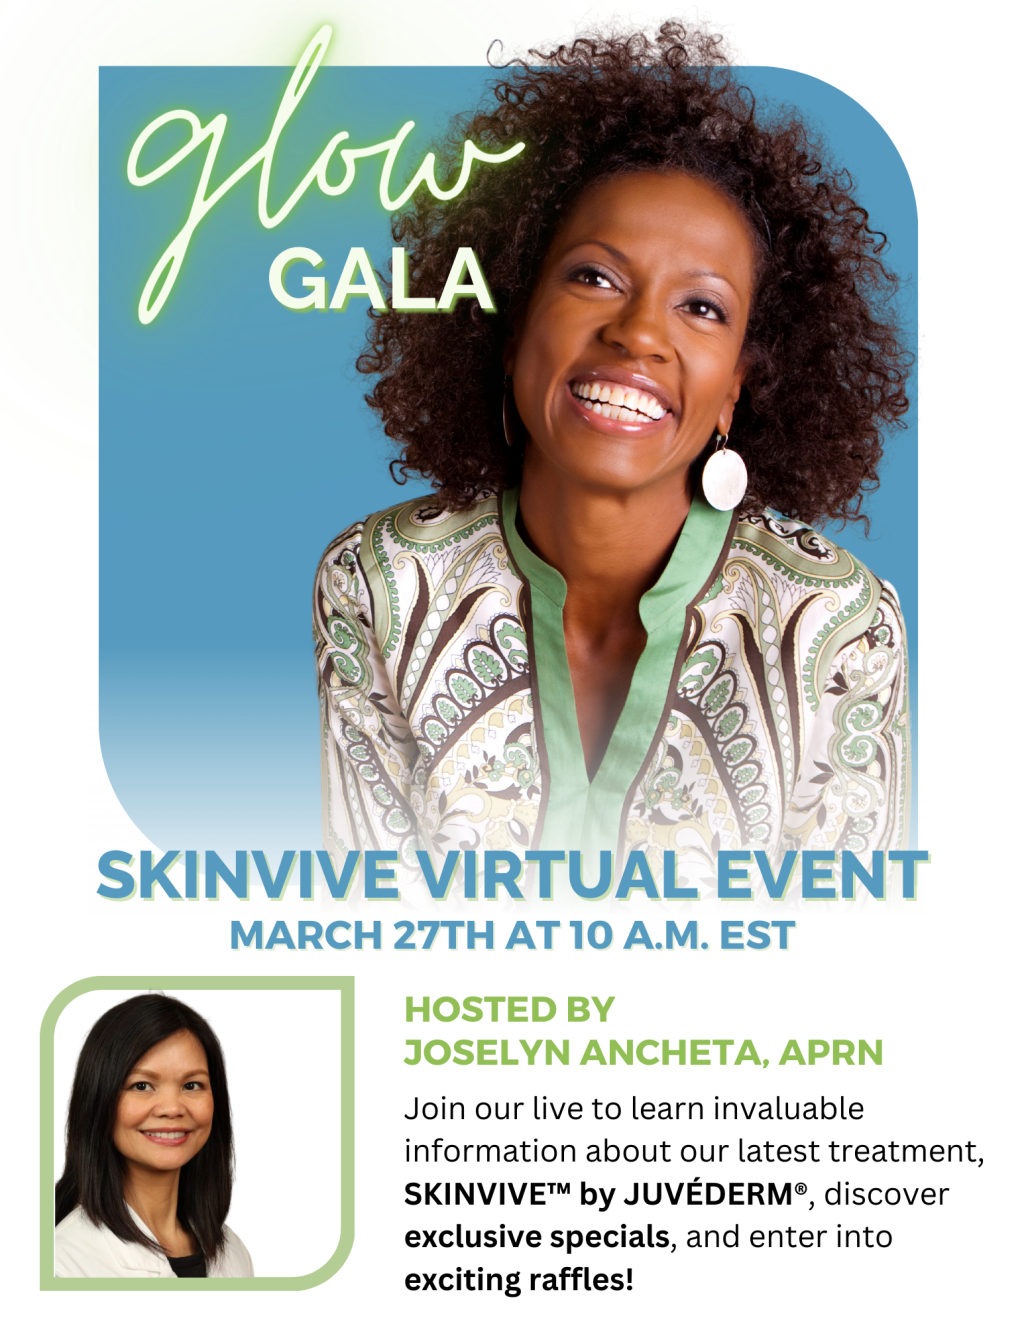 Smiling mature woman (model) with text that reads Glow Gala: Skinvive Virtual Event March 27th at 10 Am EST Hosted by Joselyn Ancheta, APRN with a picture of Joselyn